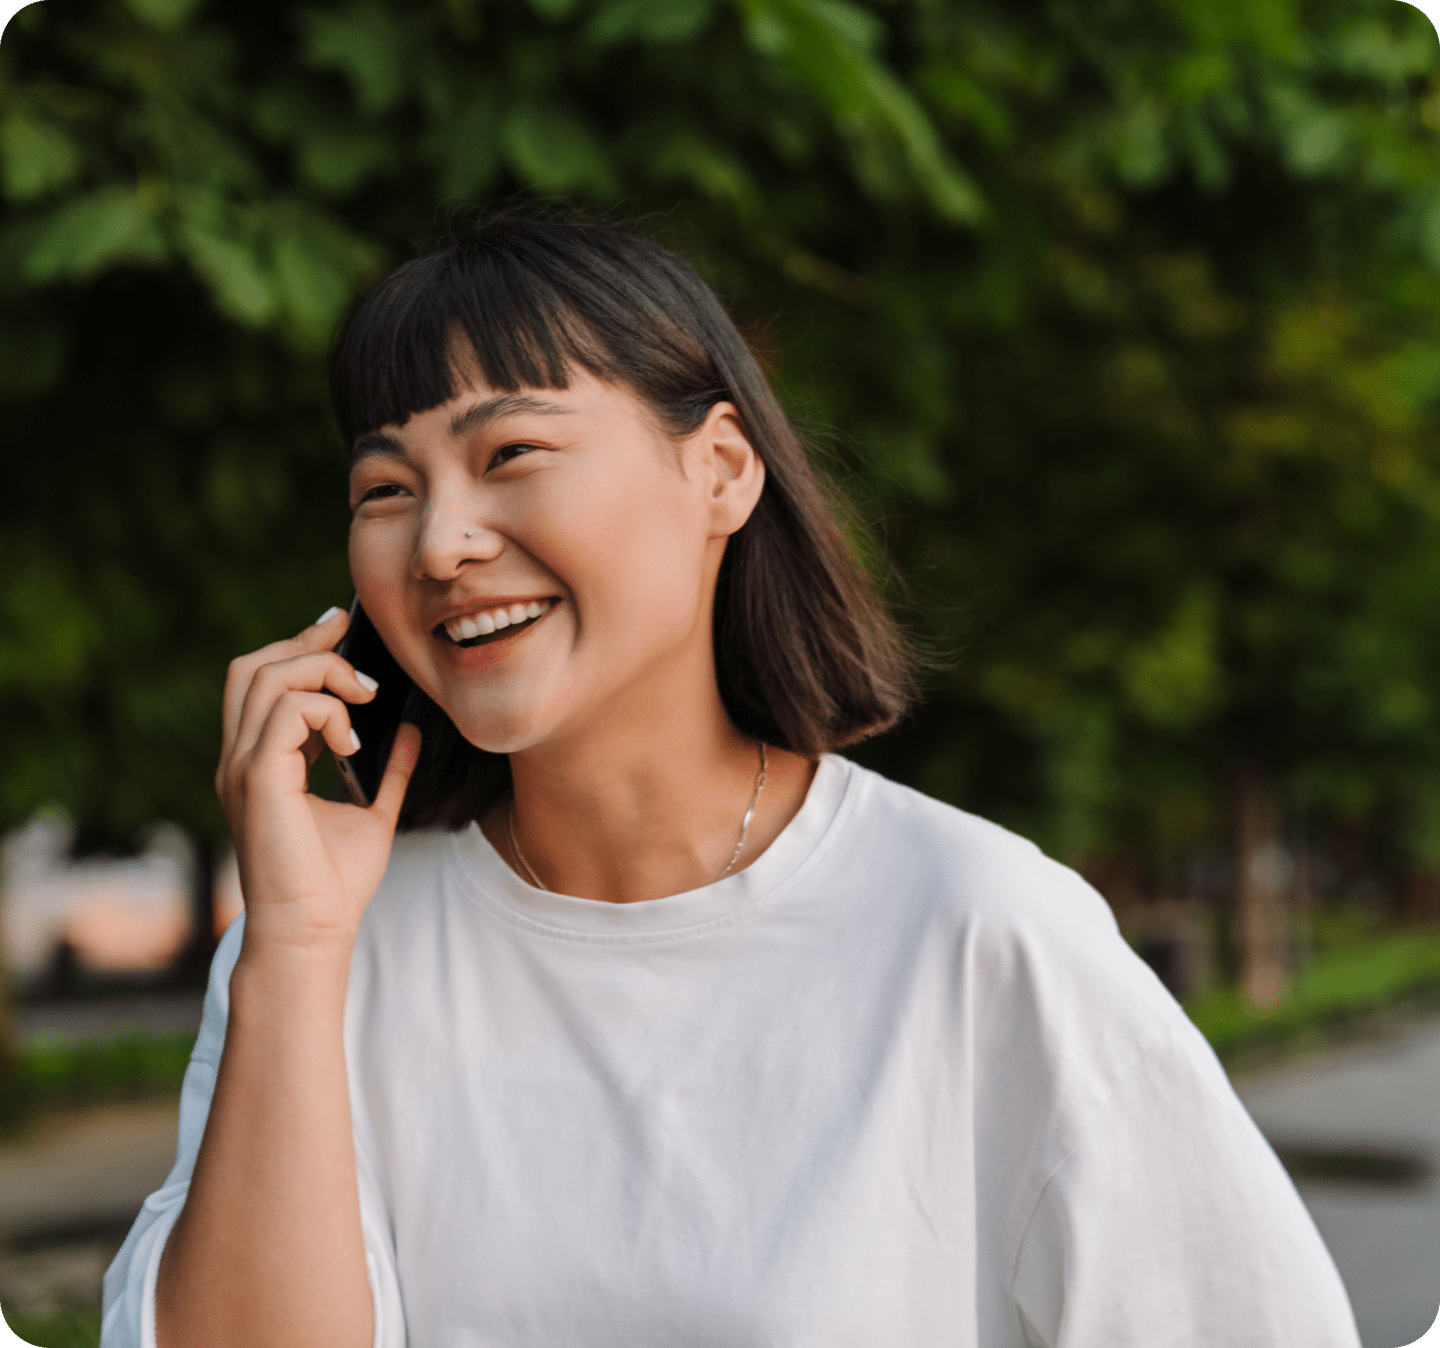 woman on phone smiling